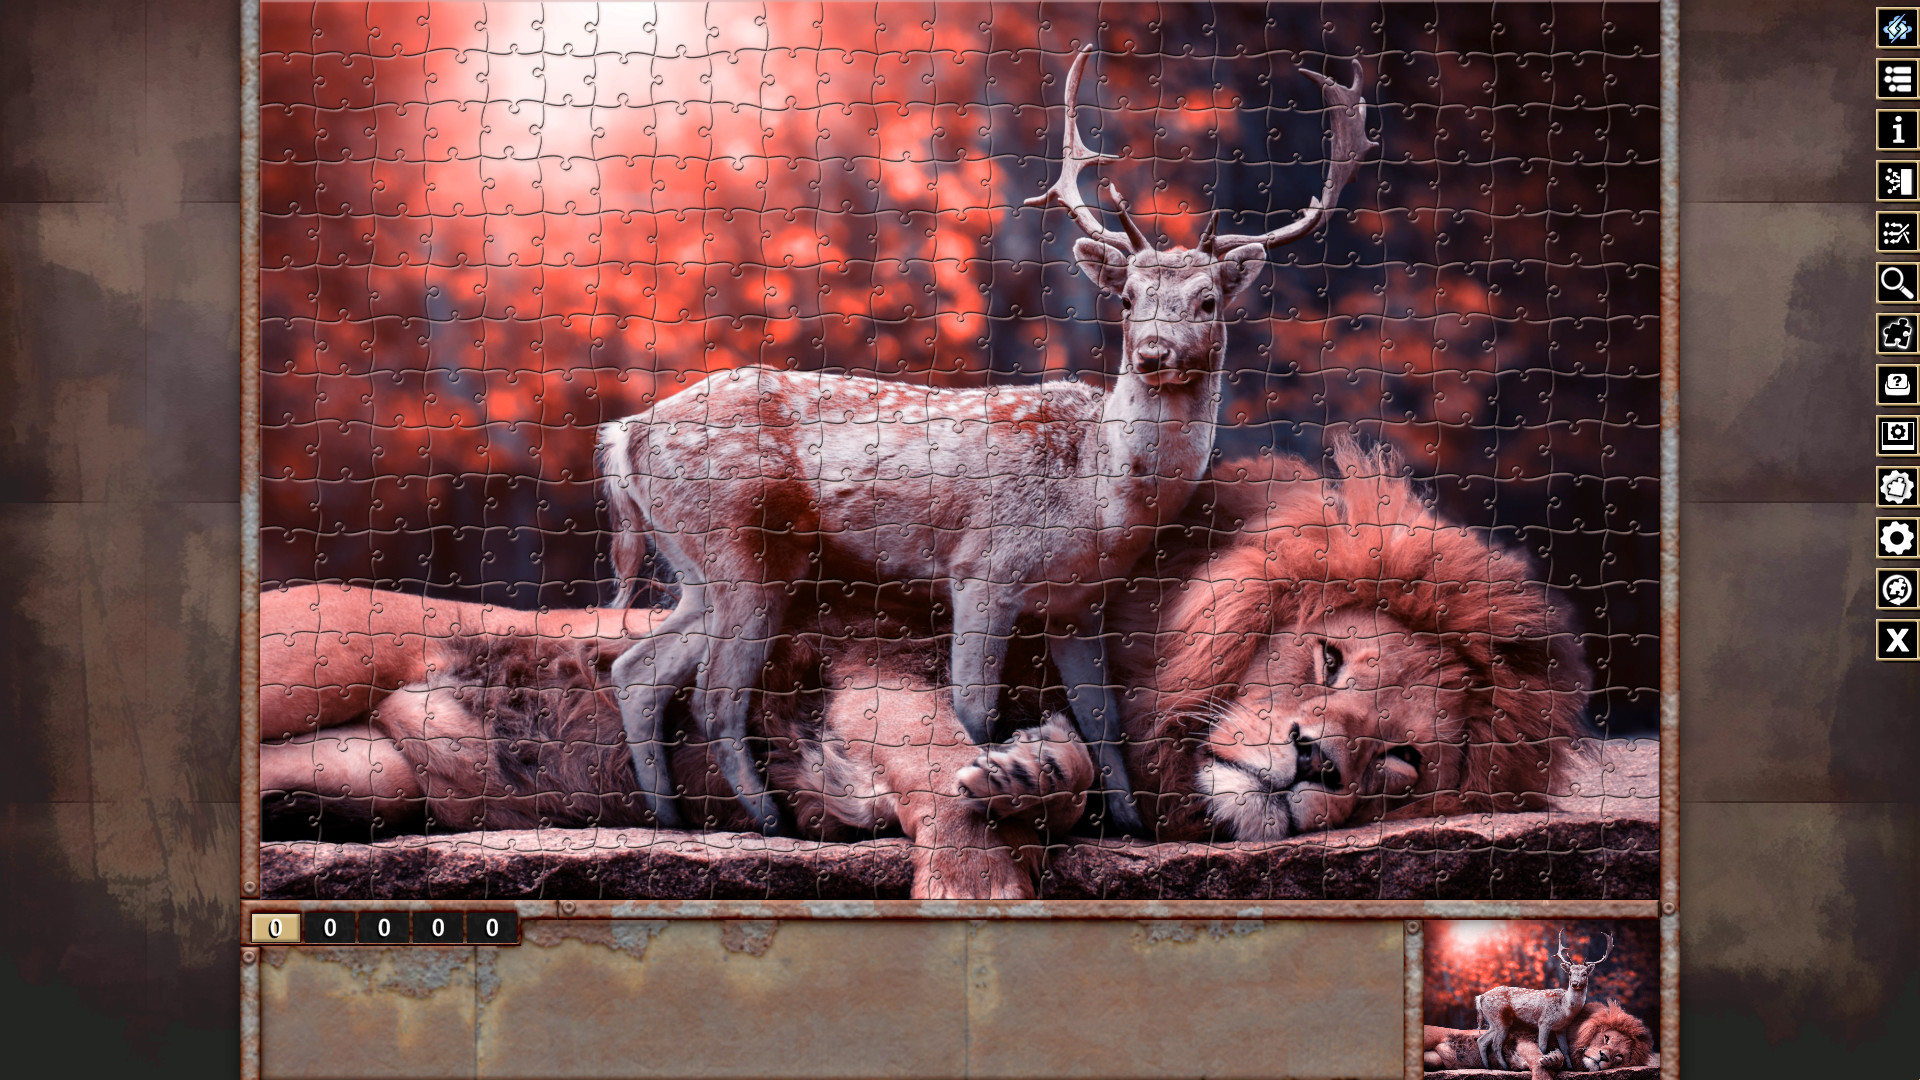 Pixel Puzzles Traditional Jigsaws Free Download